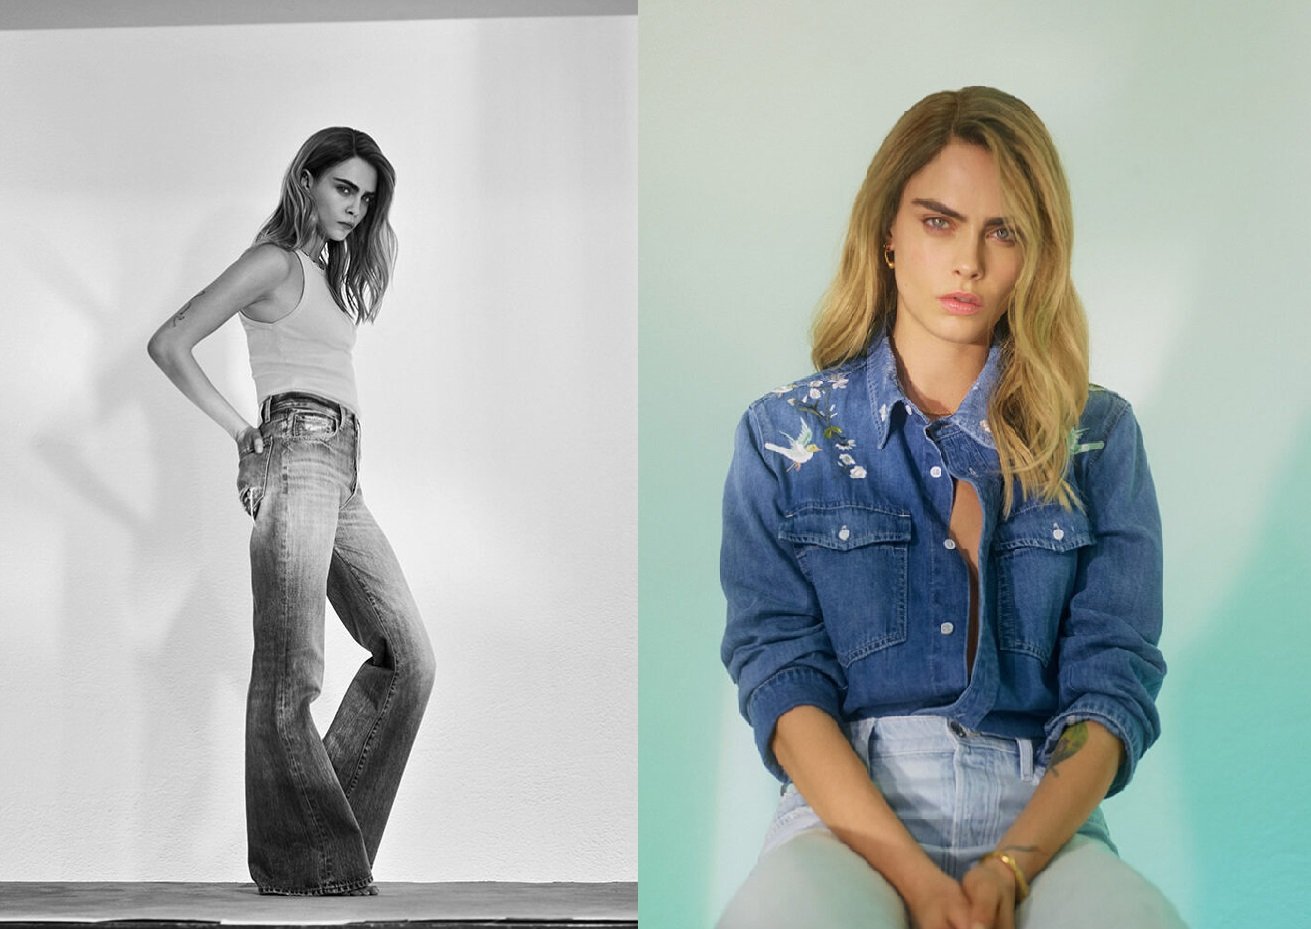 Cara-Delevingne-7-For-All-Mankind-Sp-2022 (8) duo.jpg